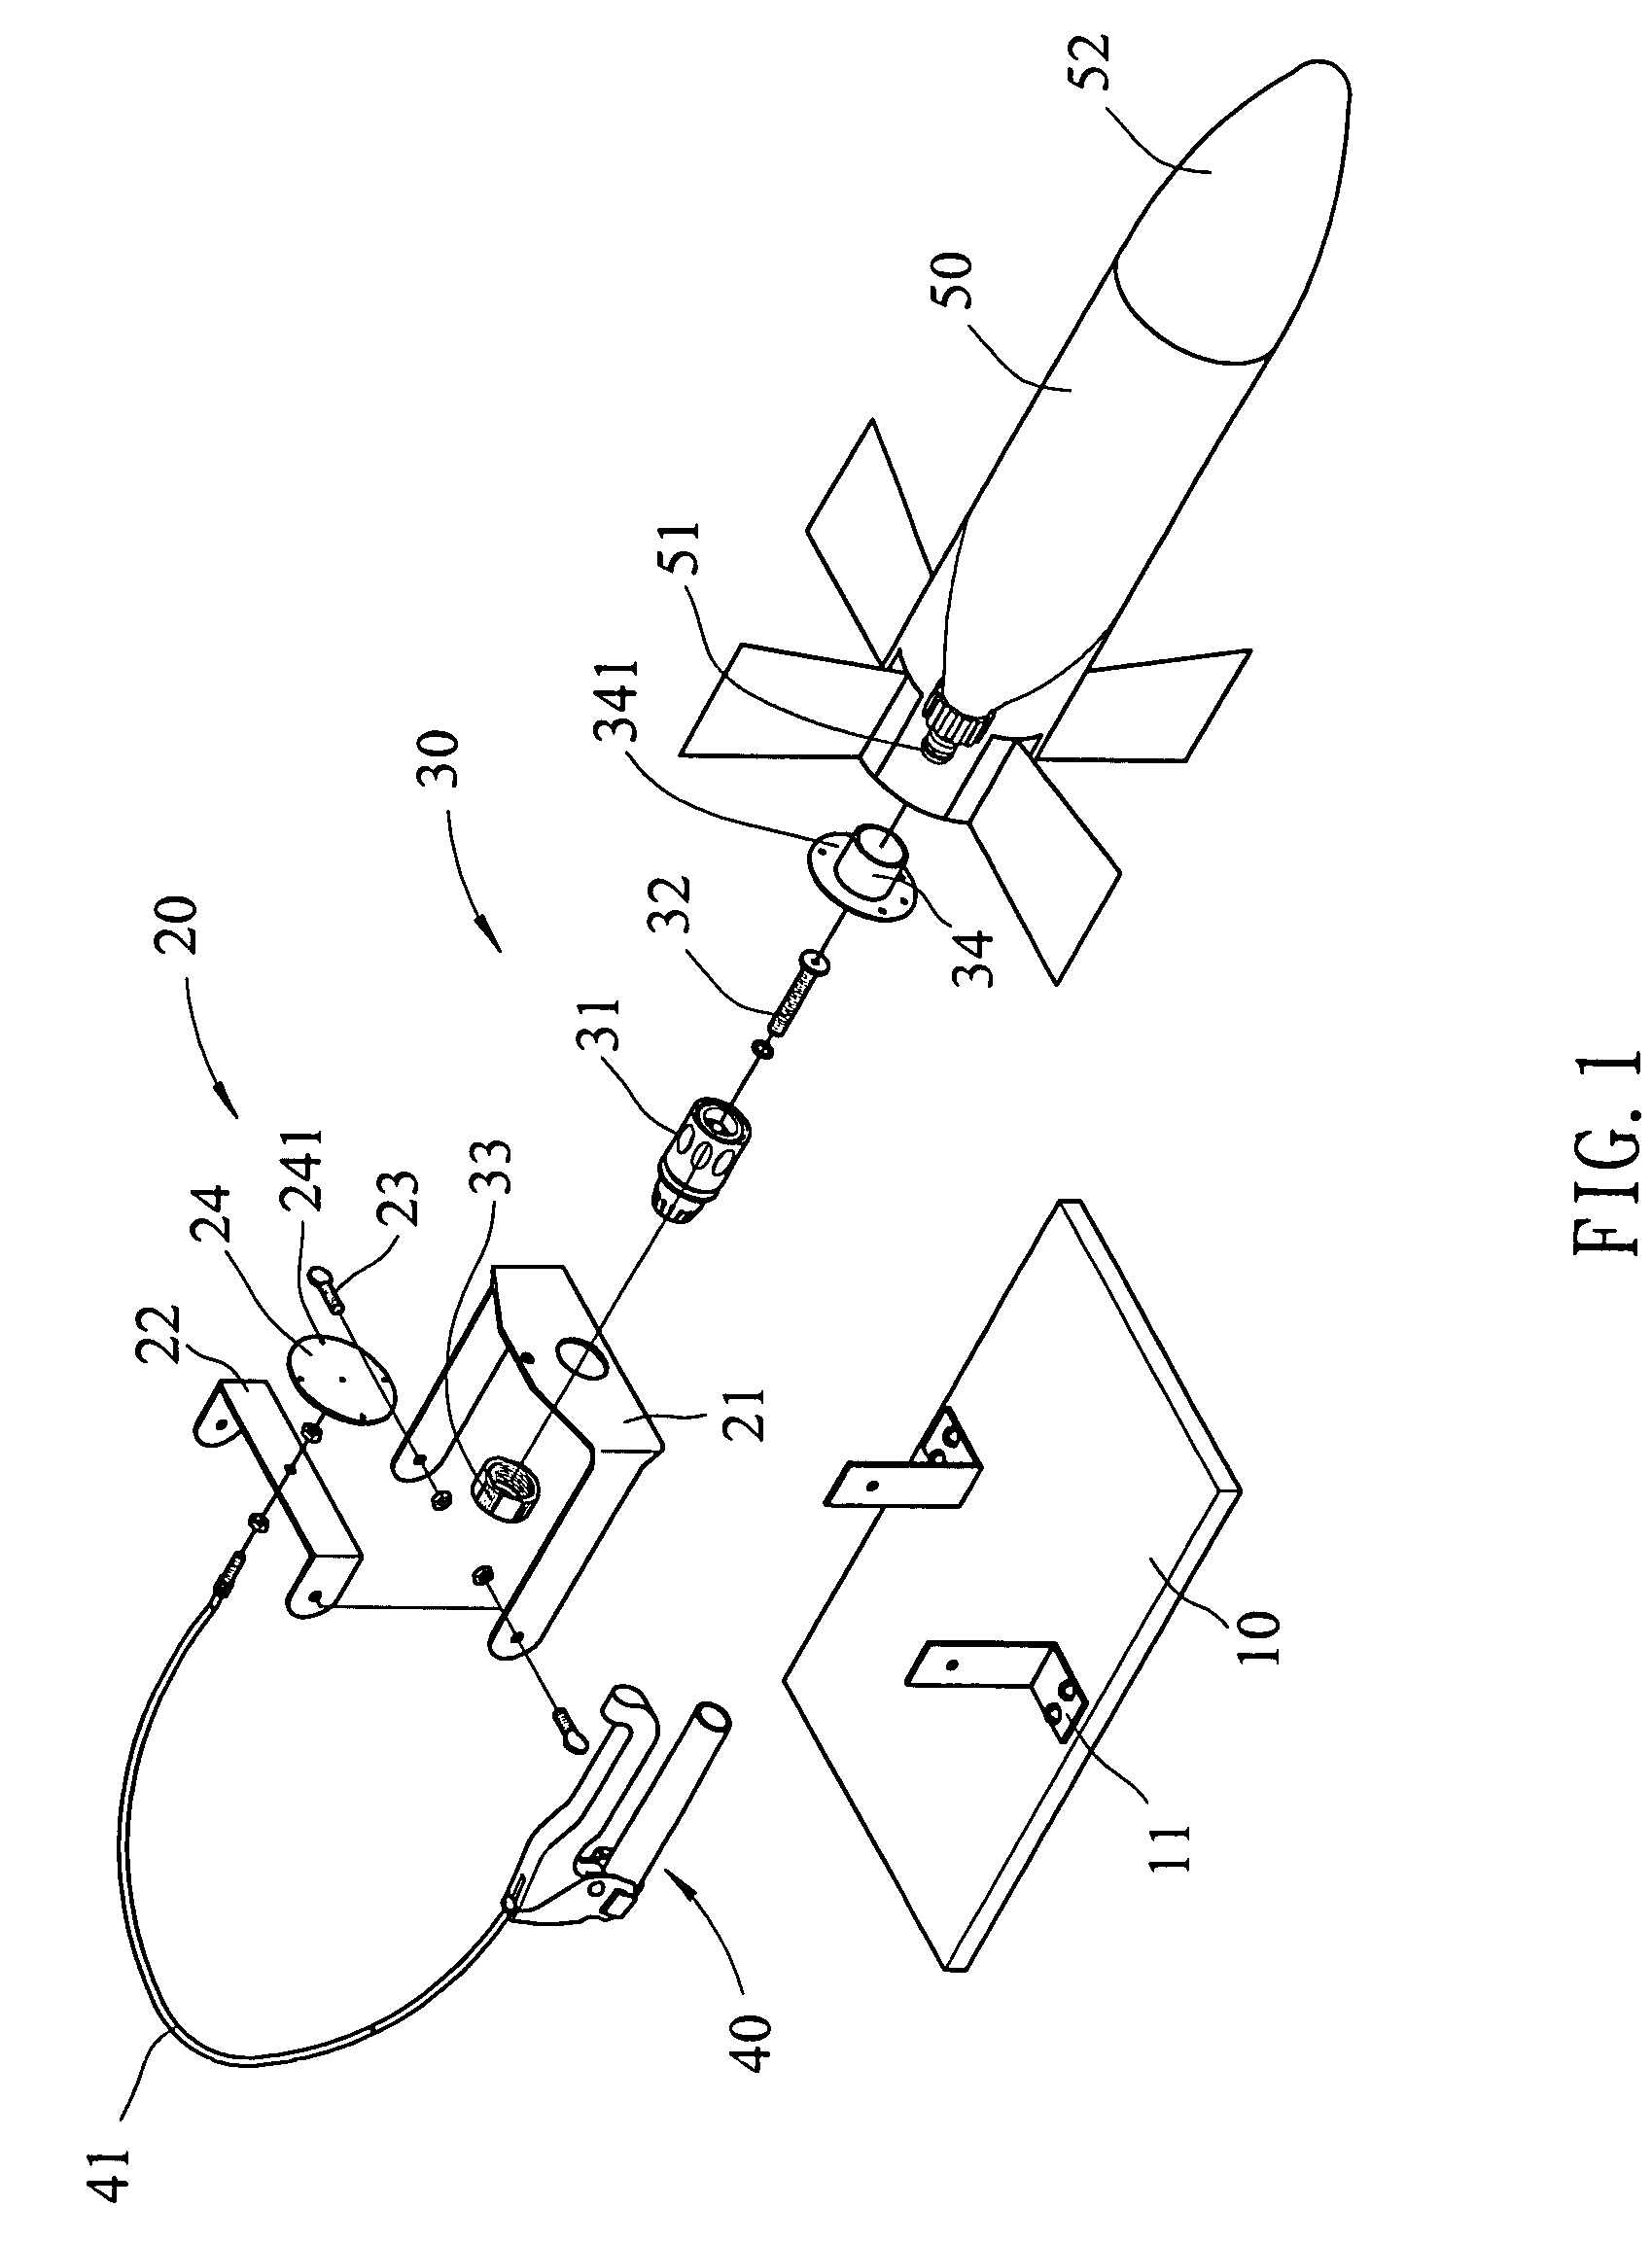 Launching device for toy rocket